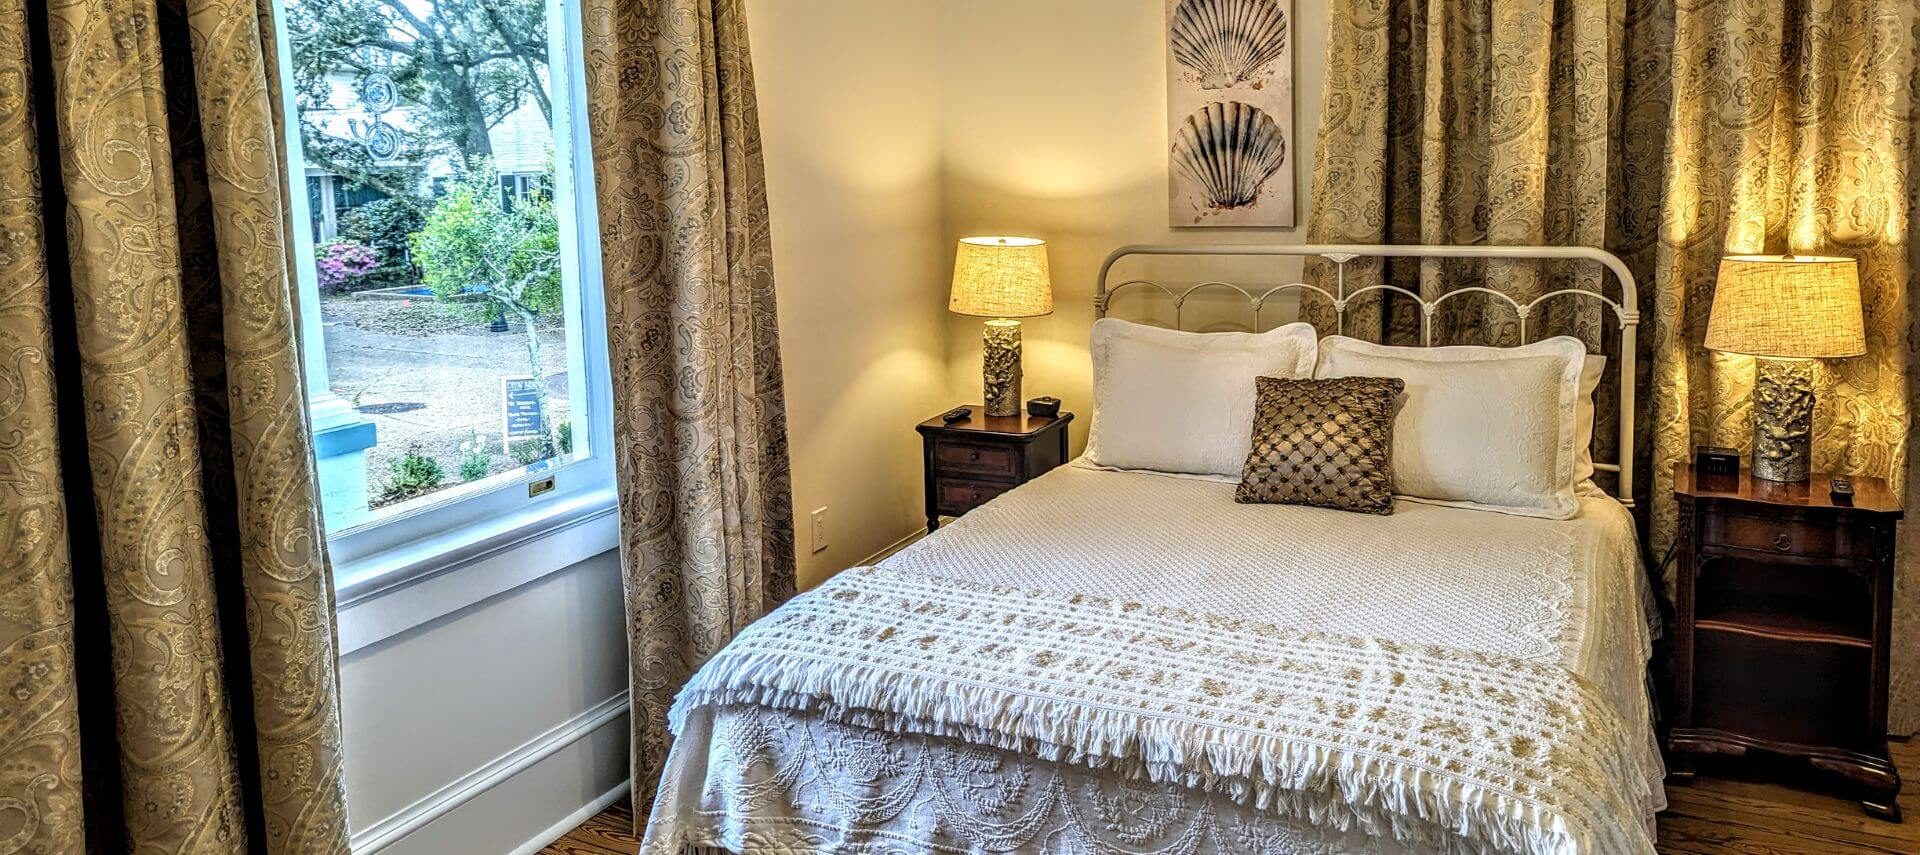 A bedroom with a bed with wrought iron headboard, white bedding, seashell photos above the the bed, a nightstand with lamp next to the bed, and a window letting in light with tapestry curtains.